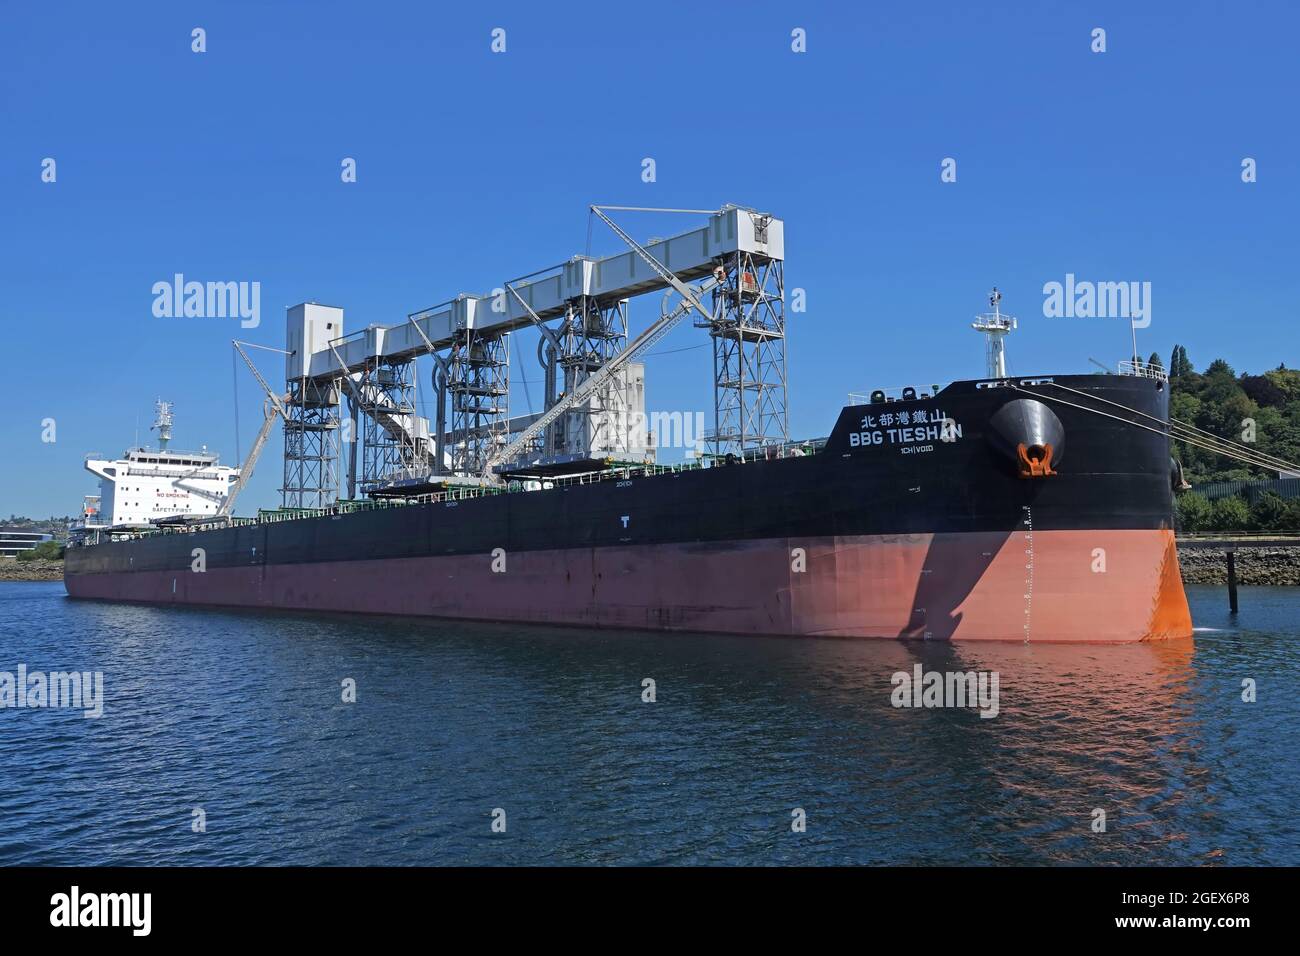 Seattle, WA / USA - June 25, 2021: The maritime dry bulk ship BBG Tieshan, which operates under the Hong Kong flag, is shown anchored. Stock Photo